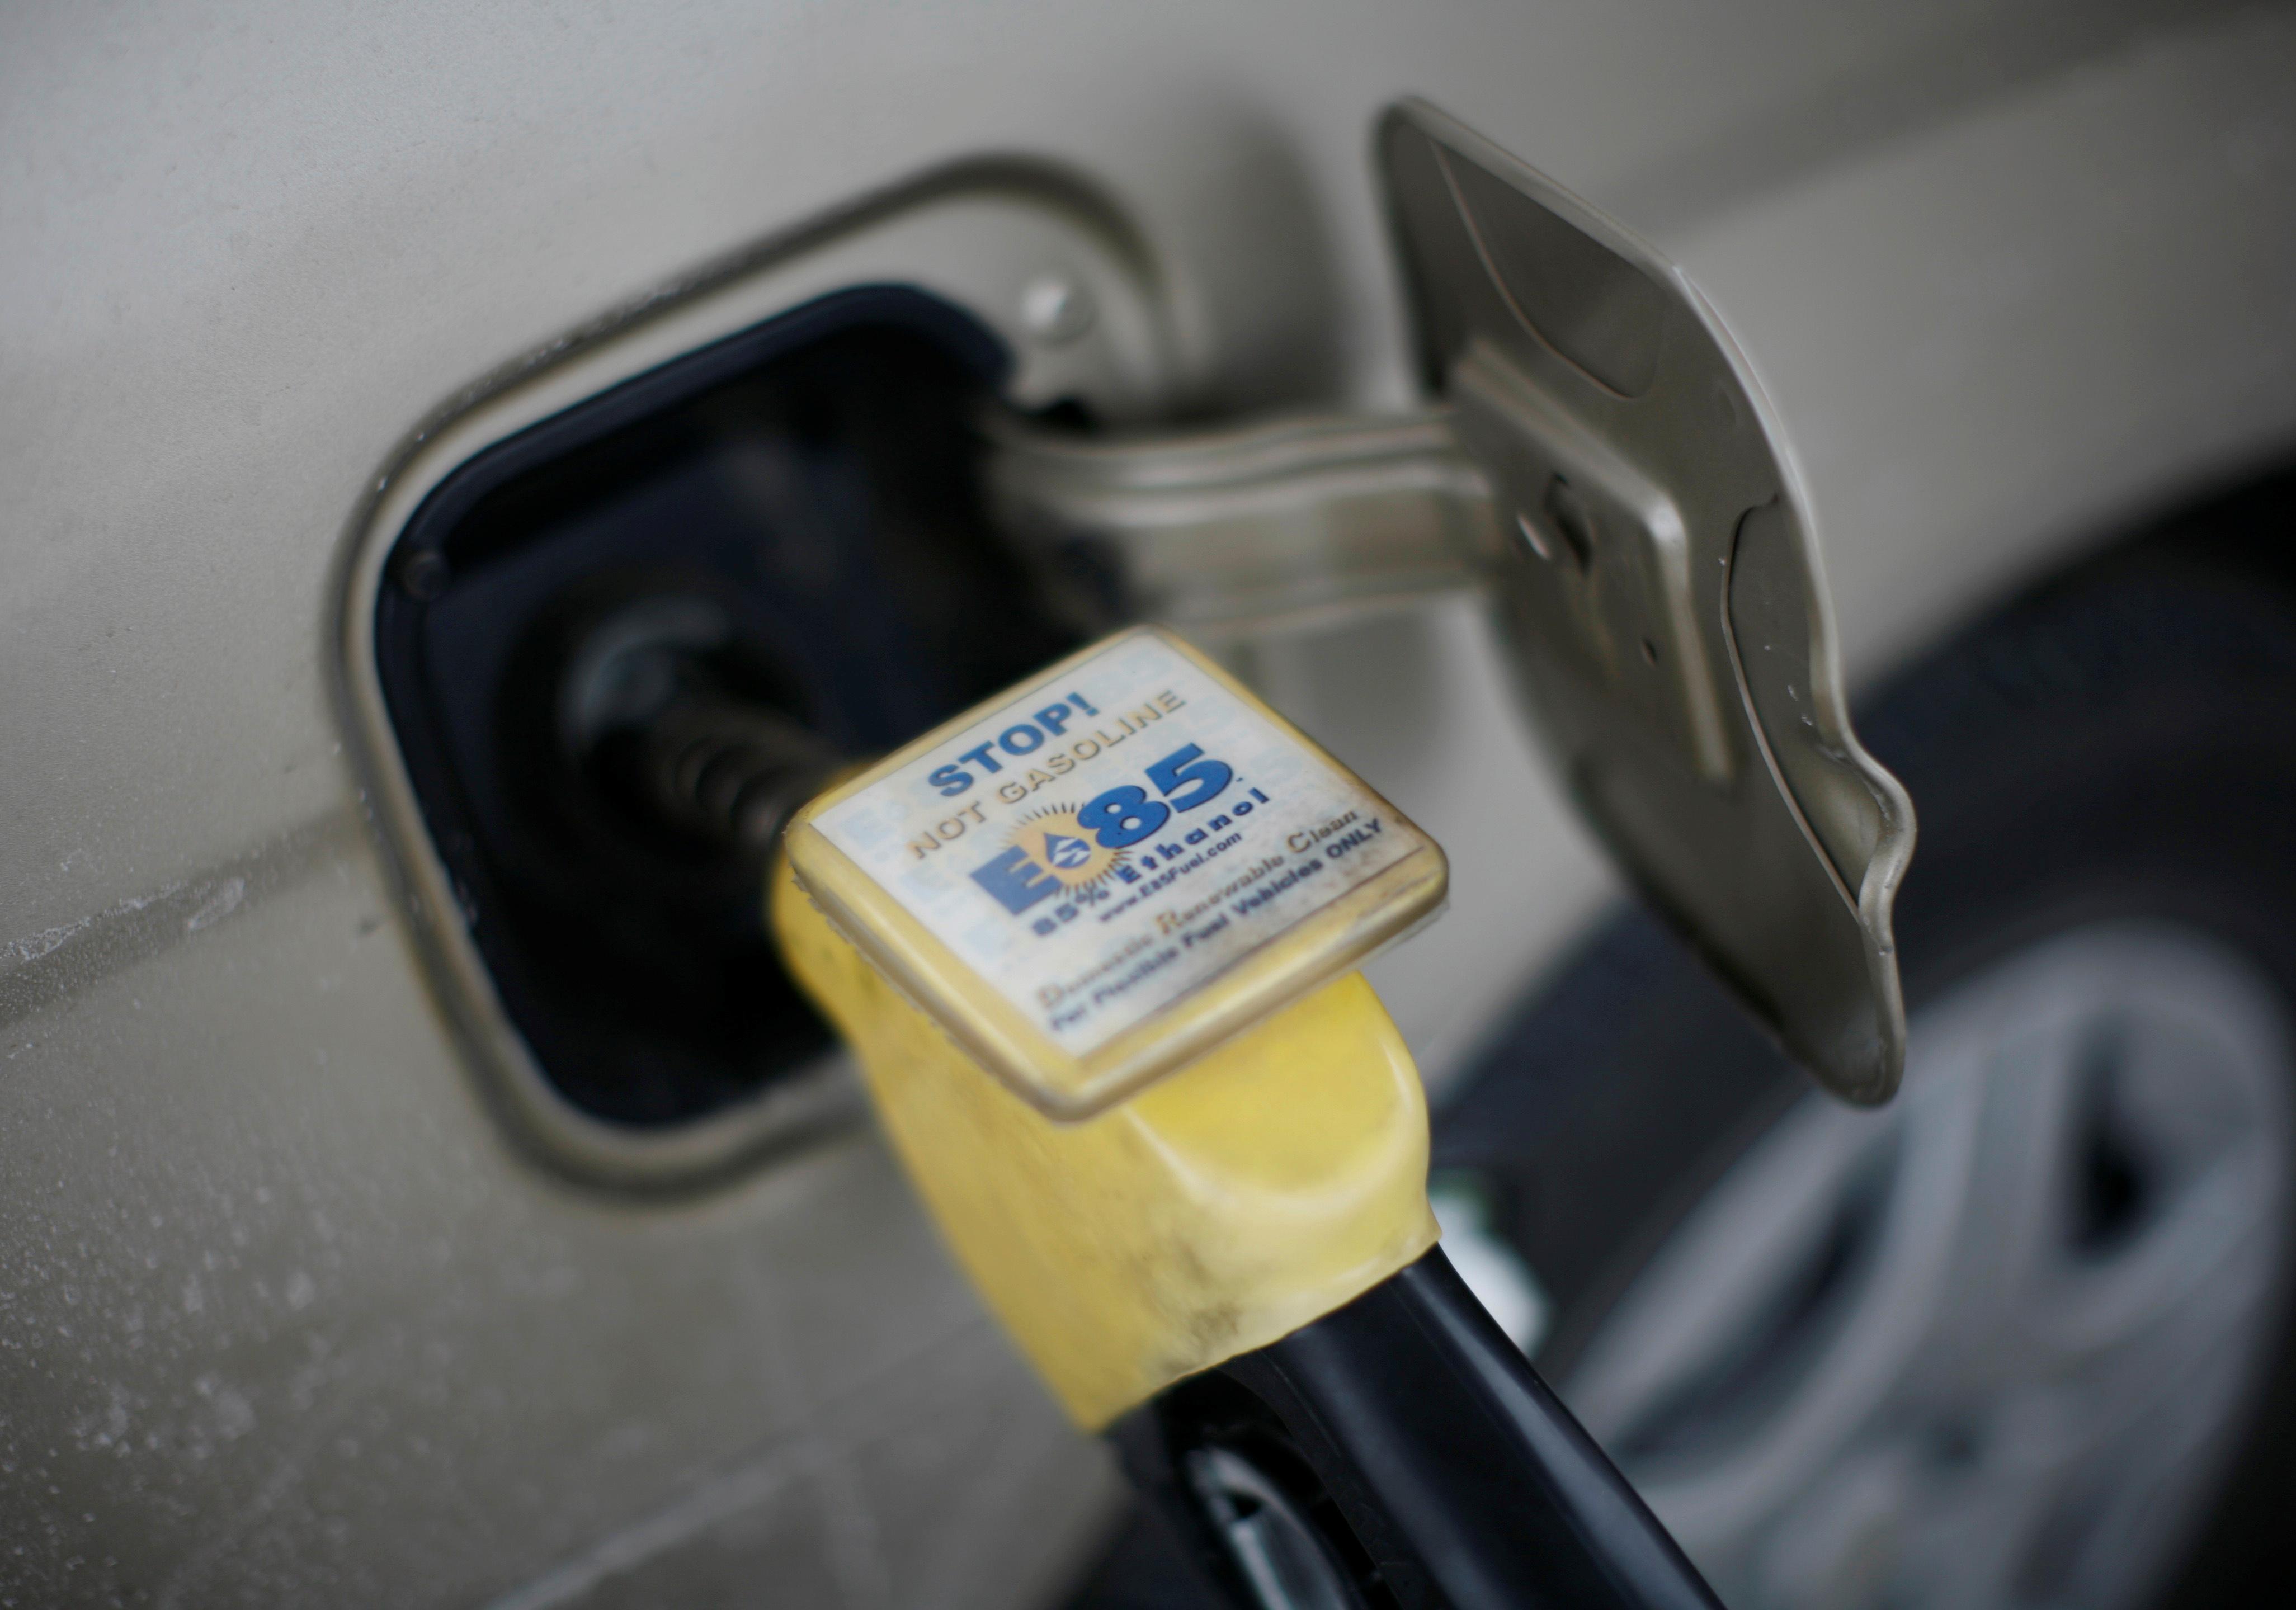 E85 Ethanol biodiesel fuel is shown being pumped into a vehicle at a gas station in Nevada, Iowa